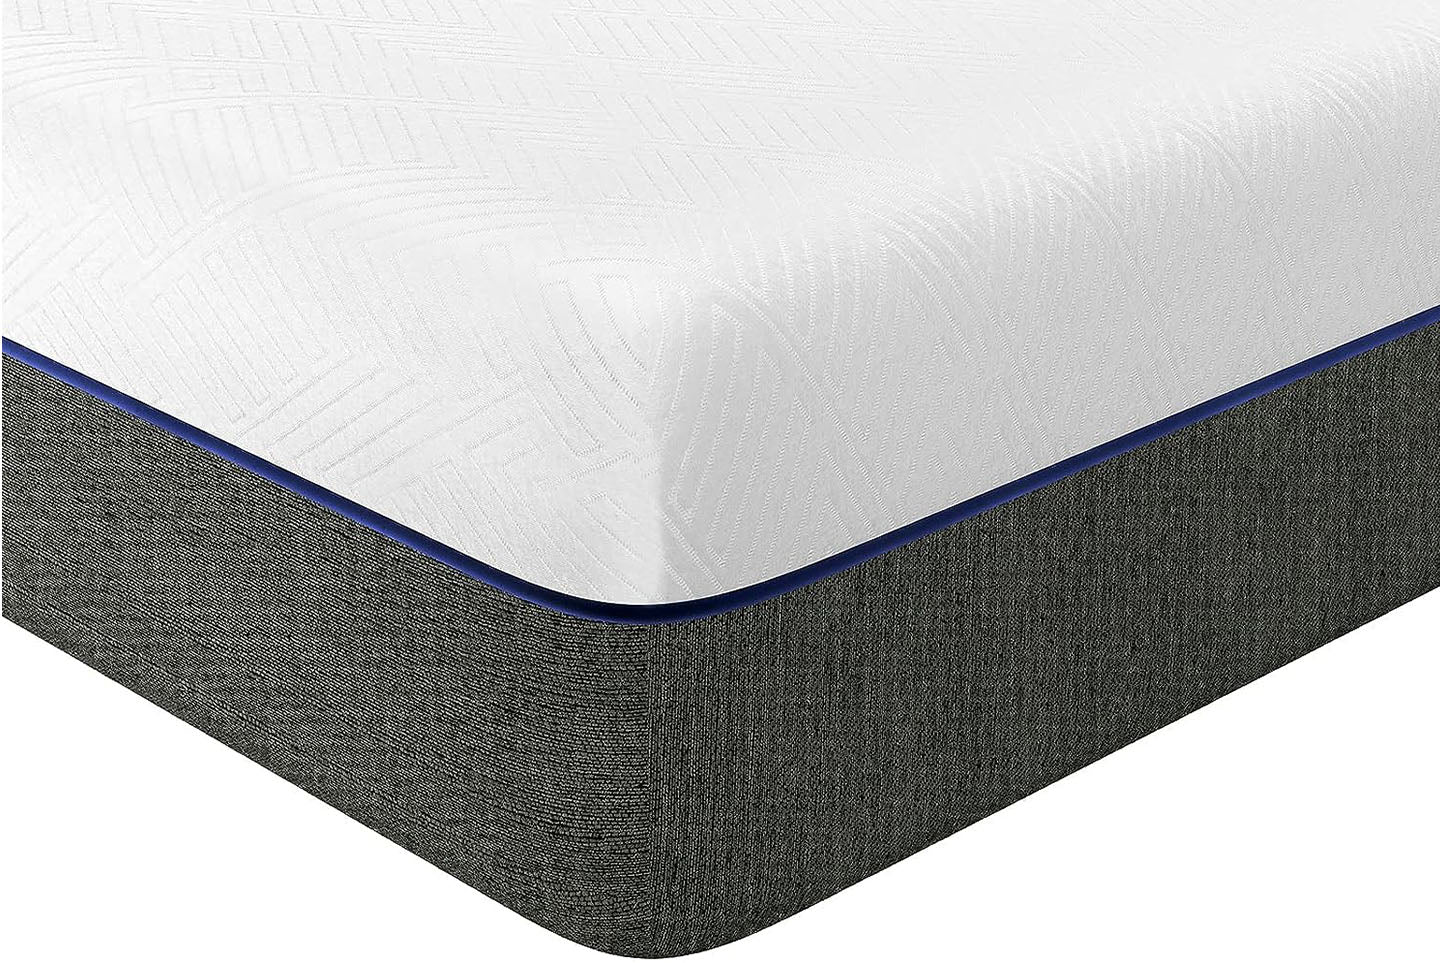 Memory Foam Mattress, Soft Fabric, Skin-friendly Mattress, Breathable Cover, 2 Layer for More Supportive 5FT King (150x200x20cm)